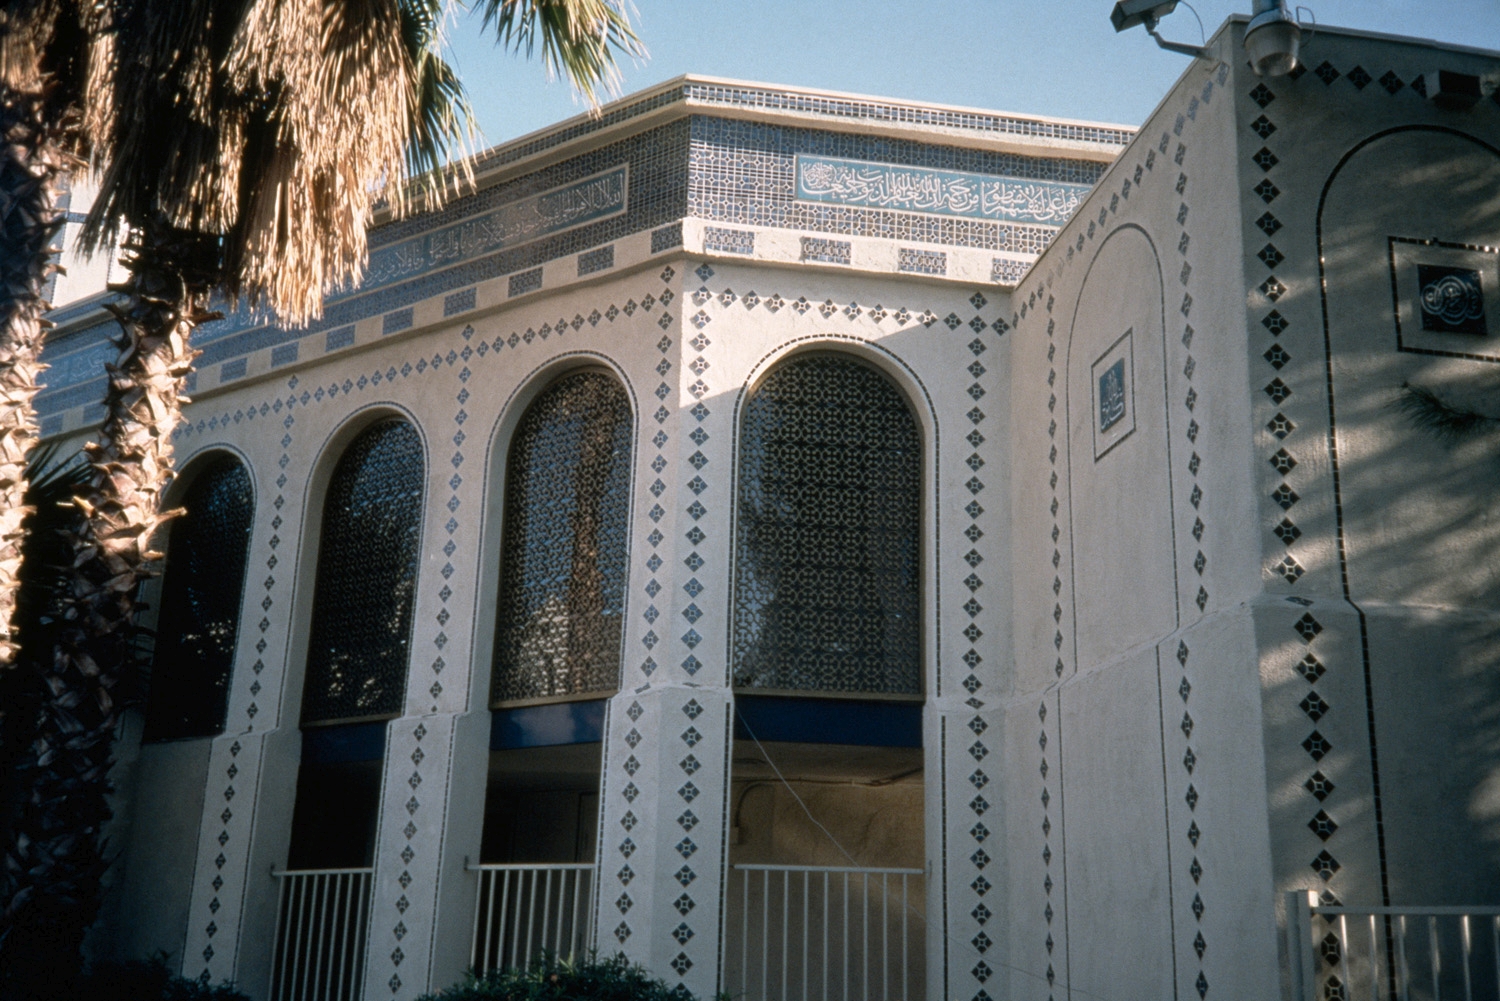 Islamic Community Center of Tempe - Exterior detail, with tile calligraphy bands and arches with lattice screens